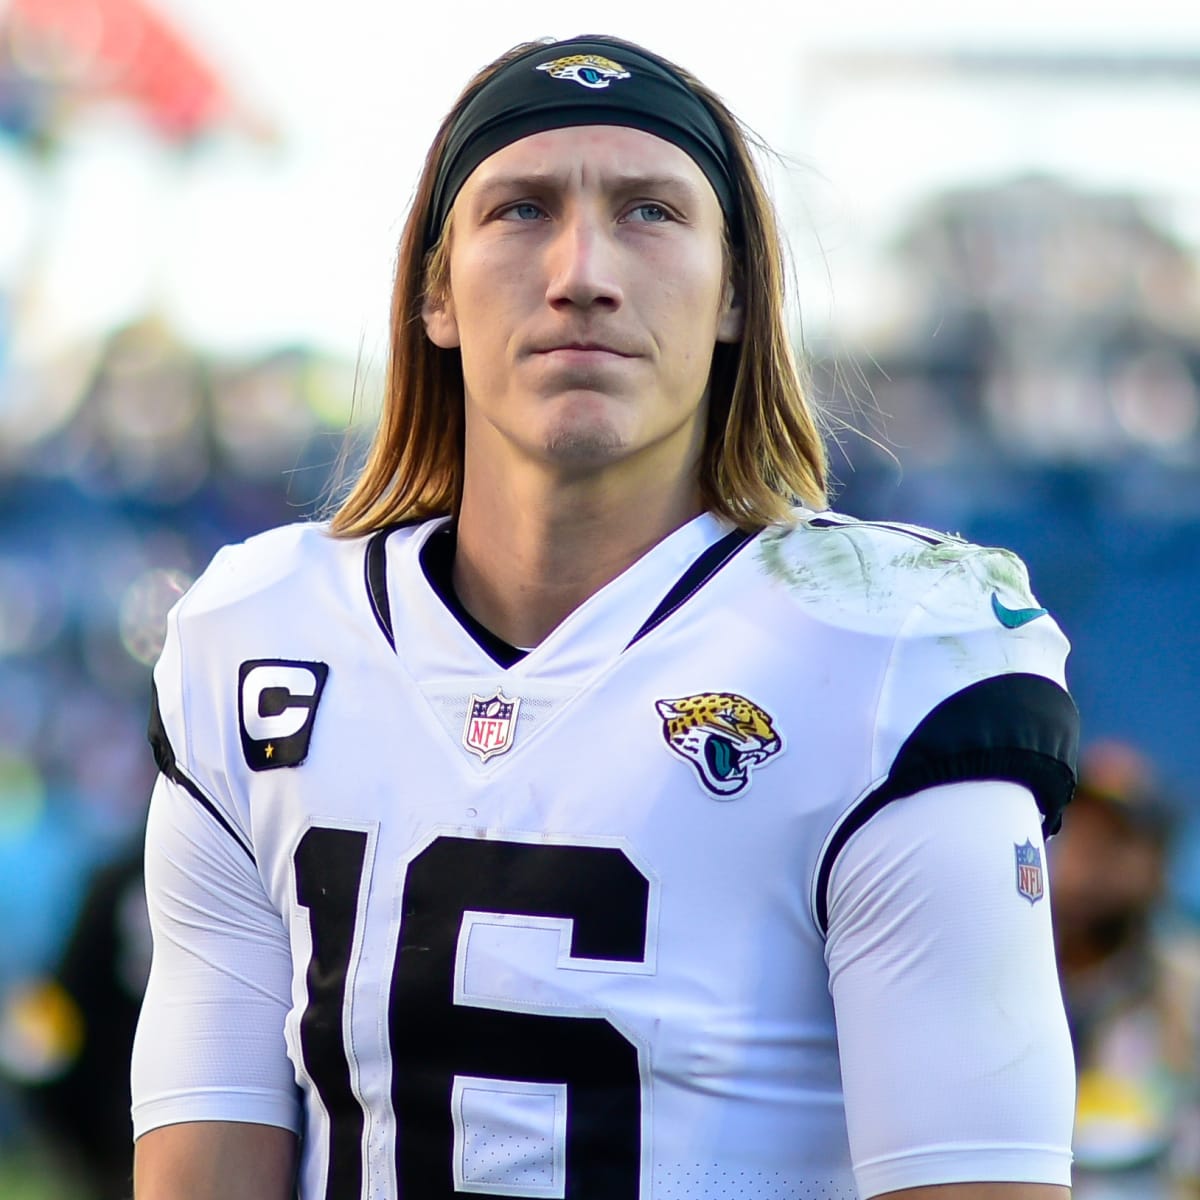 trevor lawrence out of this world